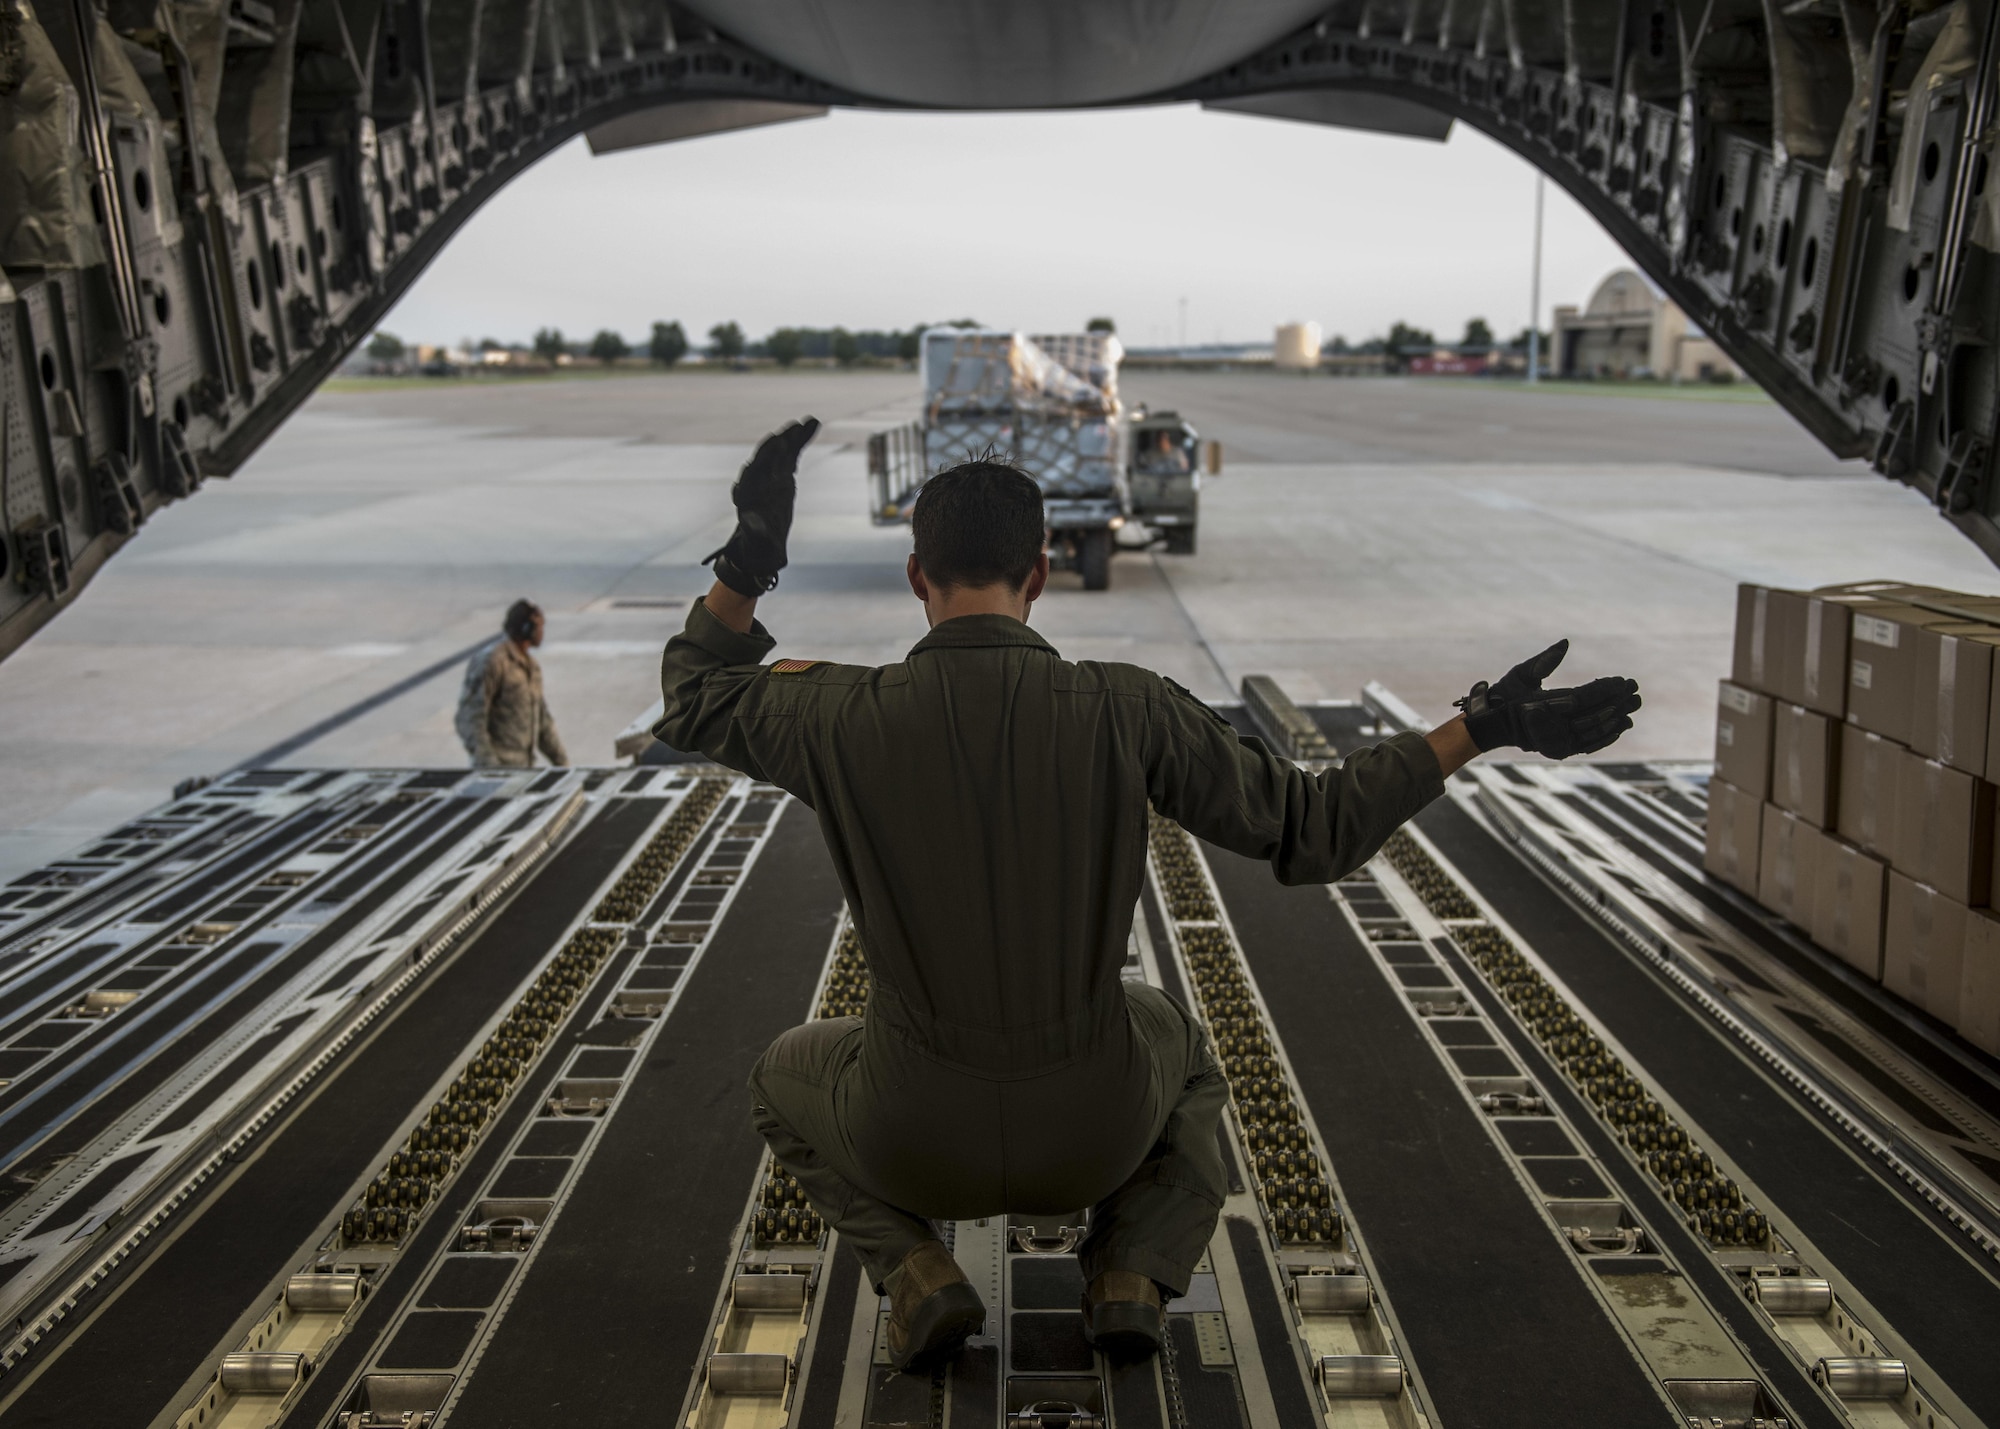 A loadmaster with the 6th Airlift Squadron directs 375th Logistics Readiness Squadron personnel toward a C-17 Globemaster III, which will transport cargo and 375th Aeromedical Evacuation Squadron personnel to Little Rock Air Force Base, Ark. to provide medical relief after Hurricane Harvey caused catastrophic floods in the states of Texas and Louisiana, Scott Air Force Base, Ill., Aug. 30, 2017.  The 375th LRS loaded 6.5 tons of medical supplies onto a C-17 Globemaster III for the nine-person medical team. The 375th AES crew, prepared to provide relief for 30 days, will be staged at Little Rock Air Force Base, where they will pick up high-priority patients from George Bush Intercontinental Airport and transport them to one of seven hospital locations across the states of Texas, Oklahoma, Louisiana, Tennessee, Mississippi, and Alabama.   (U.S. Air Force photo by Tech. Sgt. Jodi Martinez)